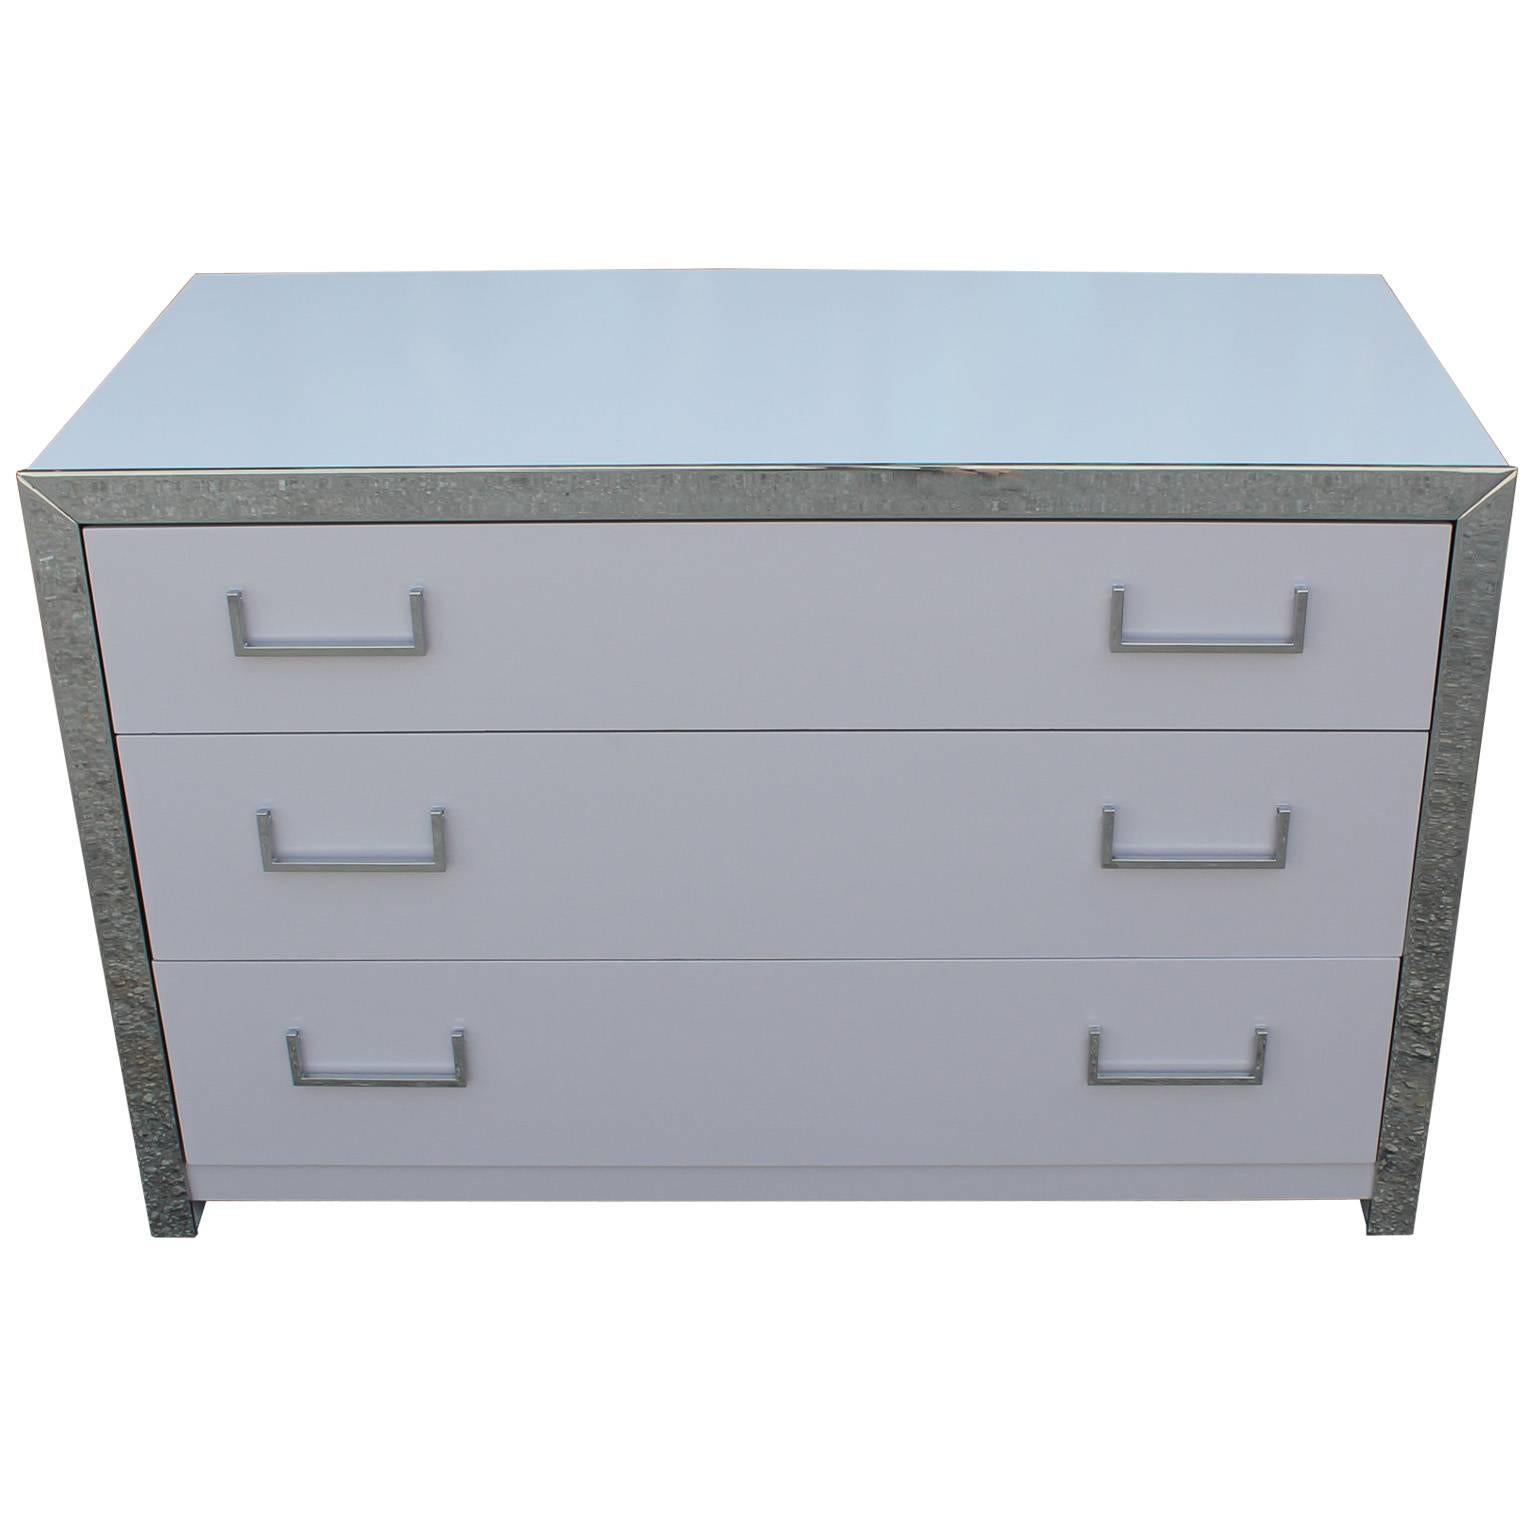 Clean lined, modern dresser or chest. Chest is finished in a light dove grey lacquer. Chrome hardware and accents.